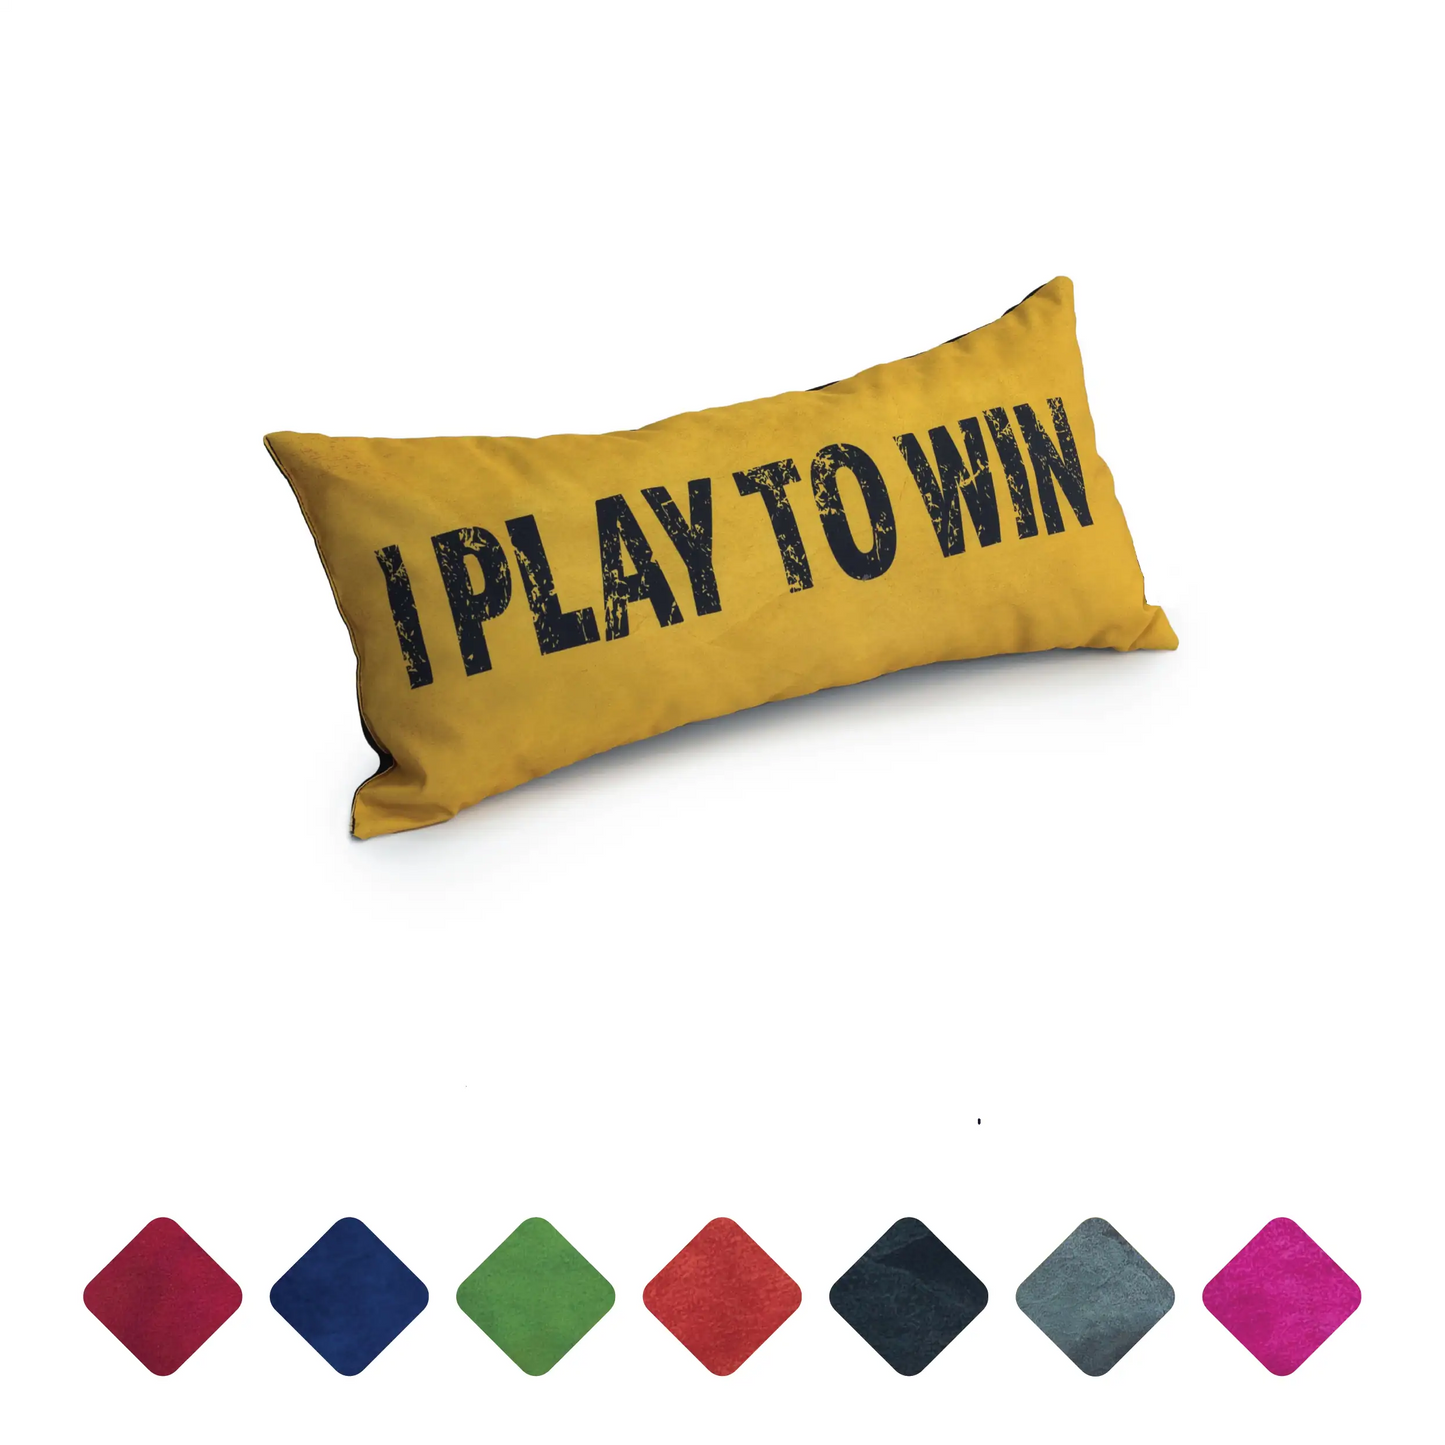 A rectangular pillow with the words "i play to win" printed on it.